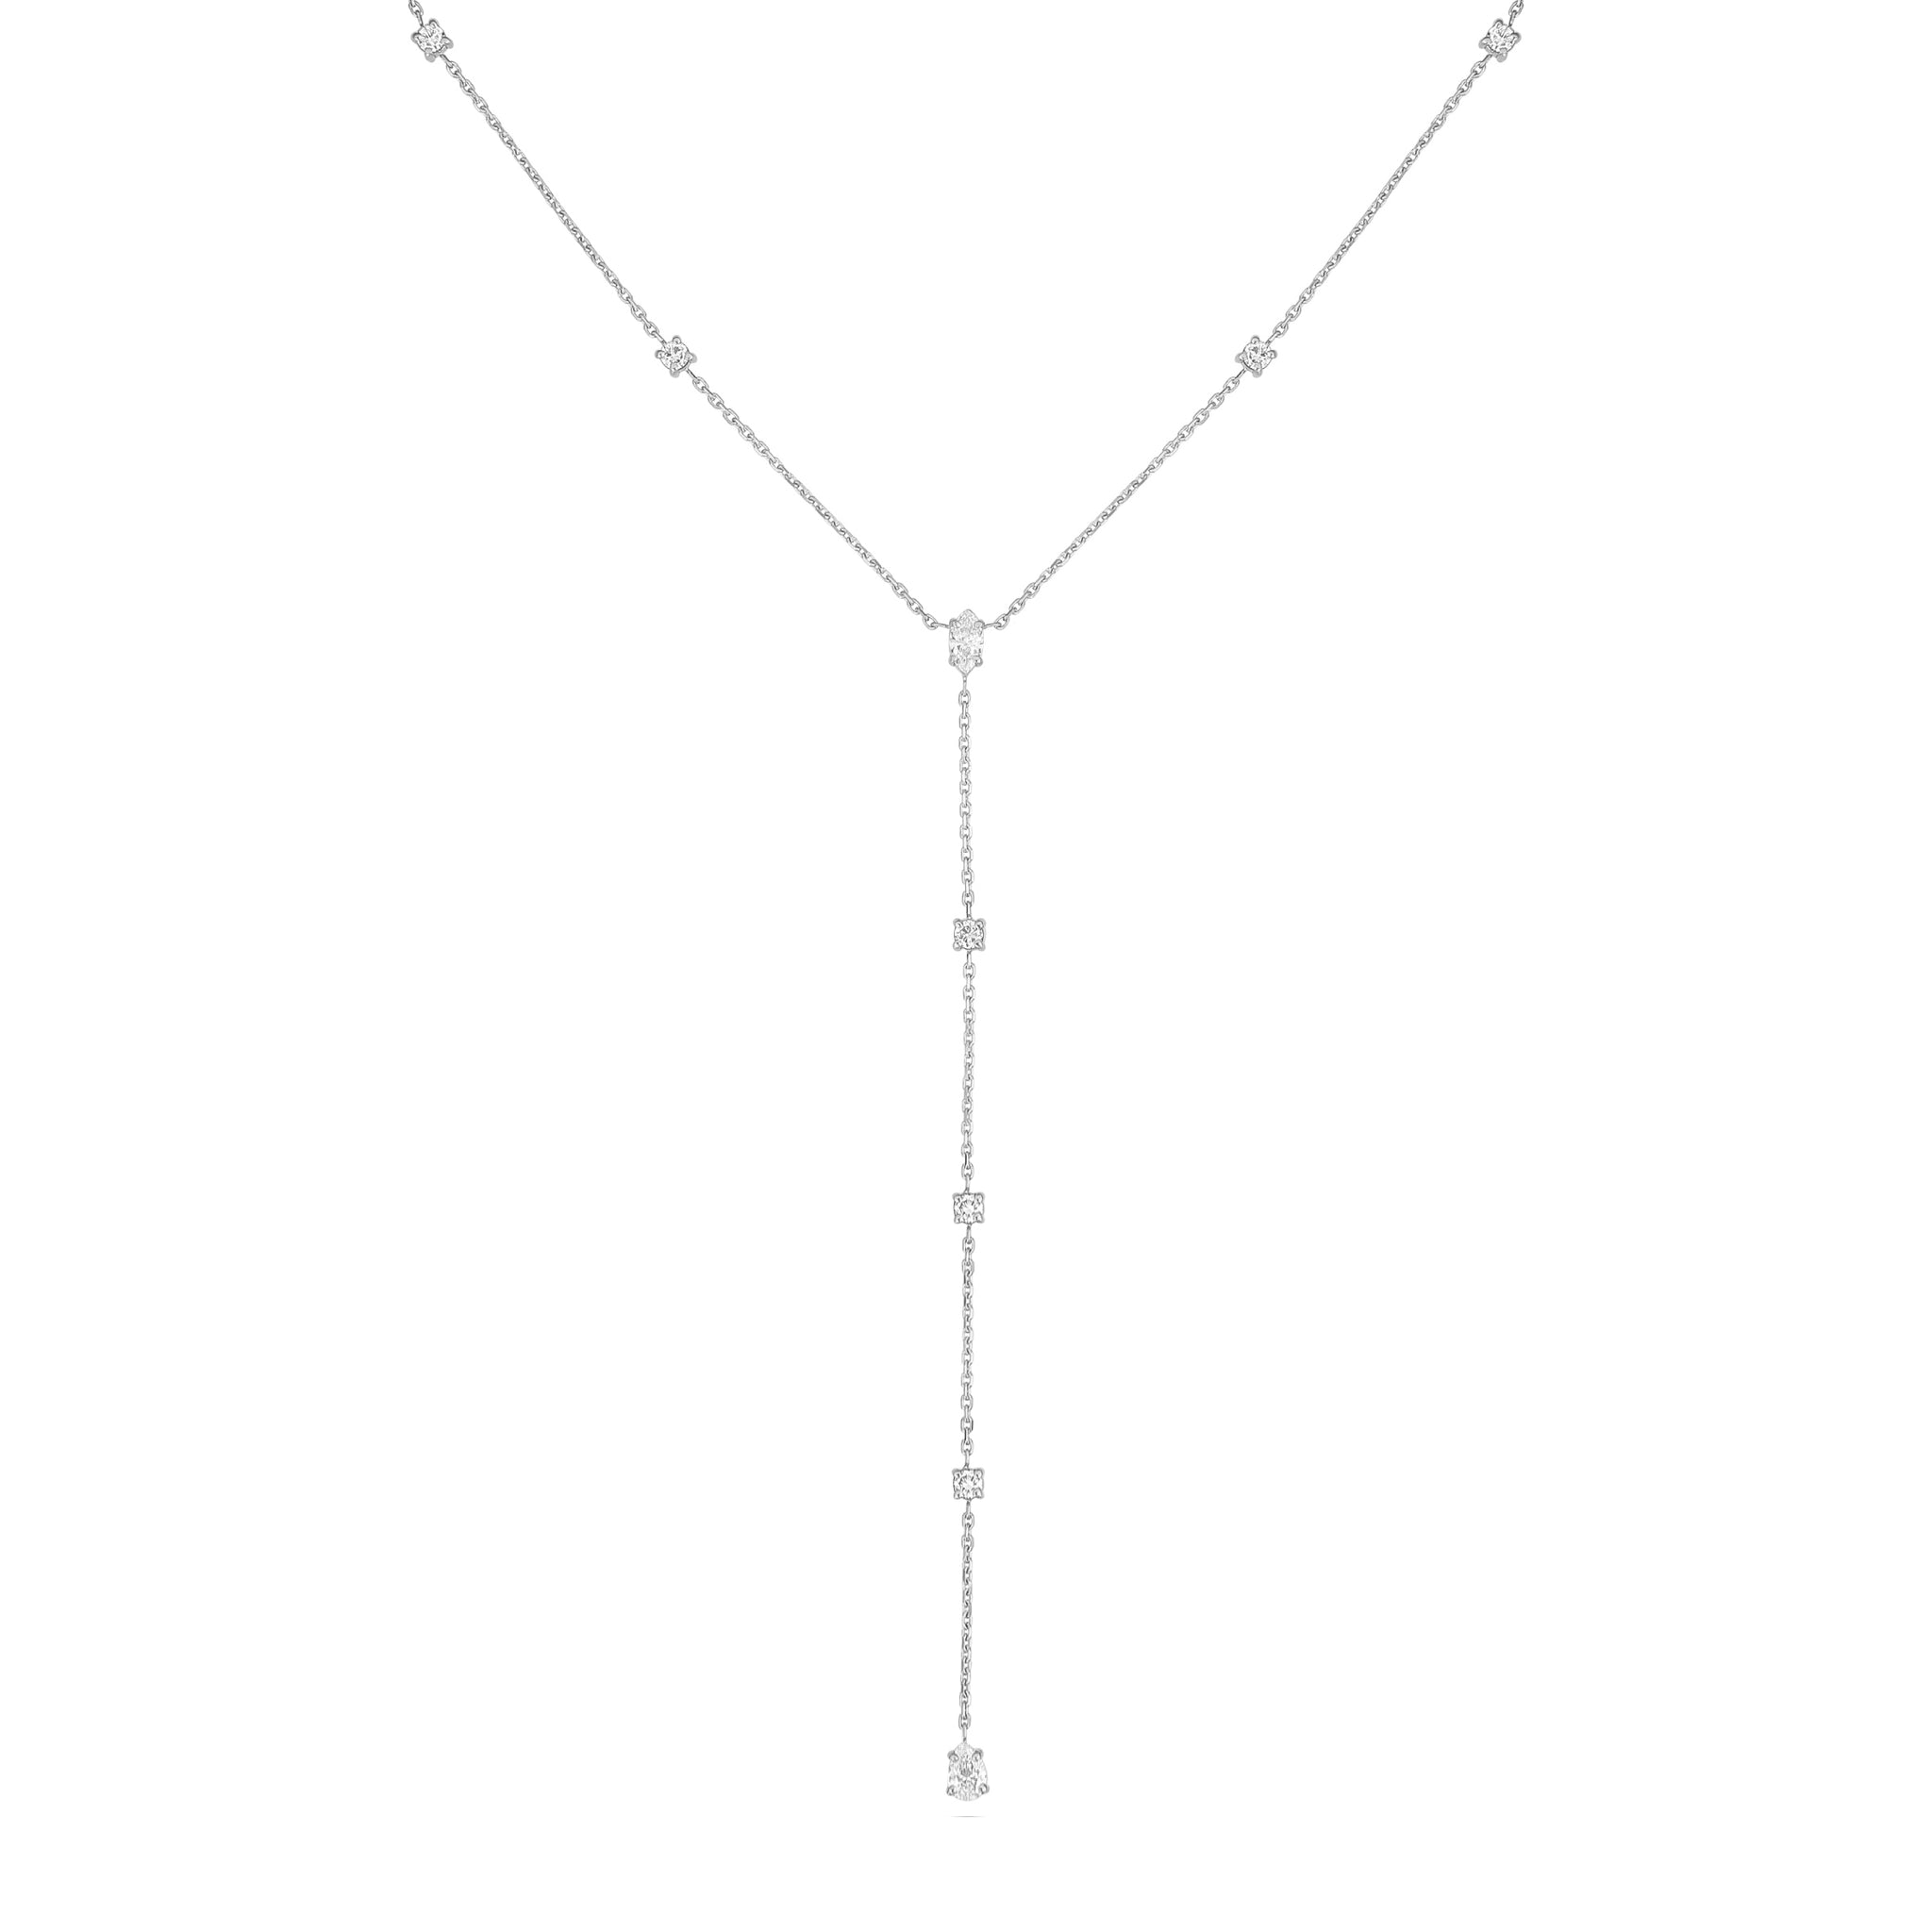 Gaia Long Drop Diamond Necklace in White Gold